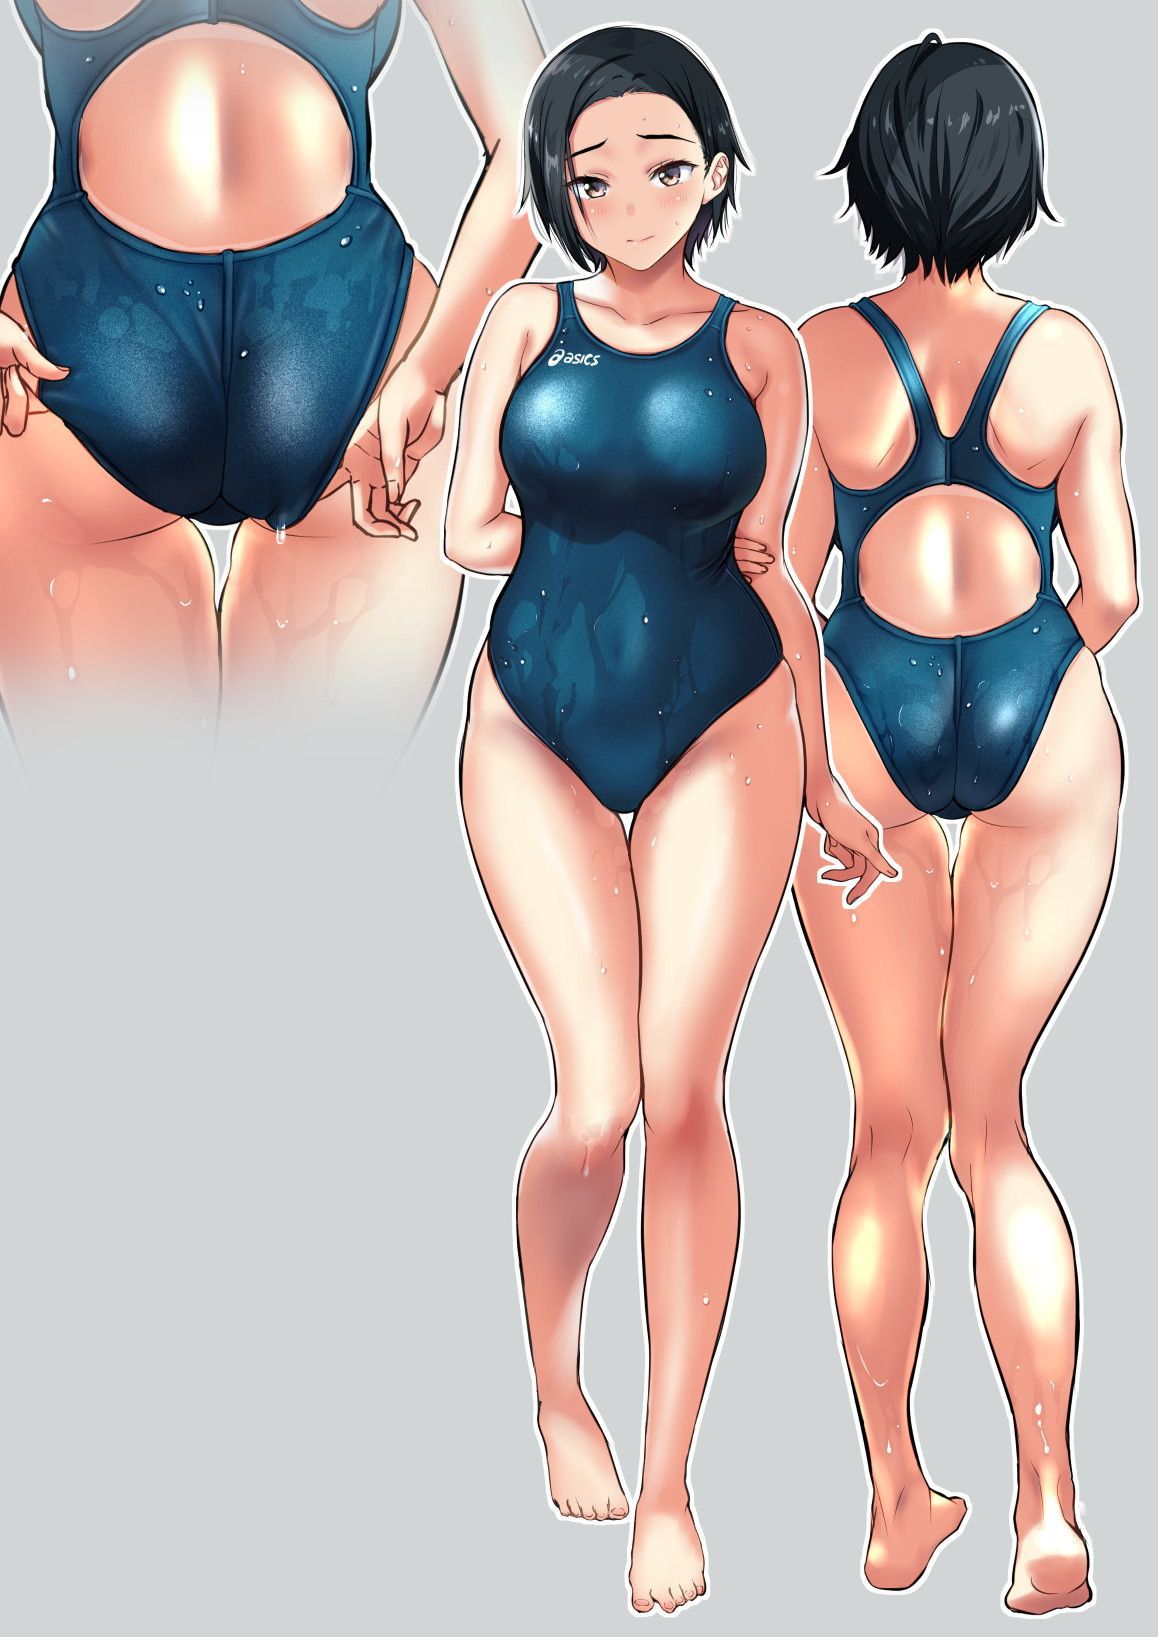 It's an erotic image of a competitive swimsuit! 17